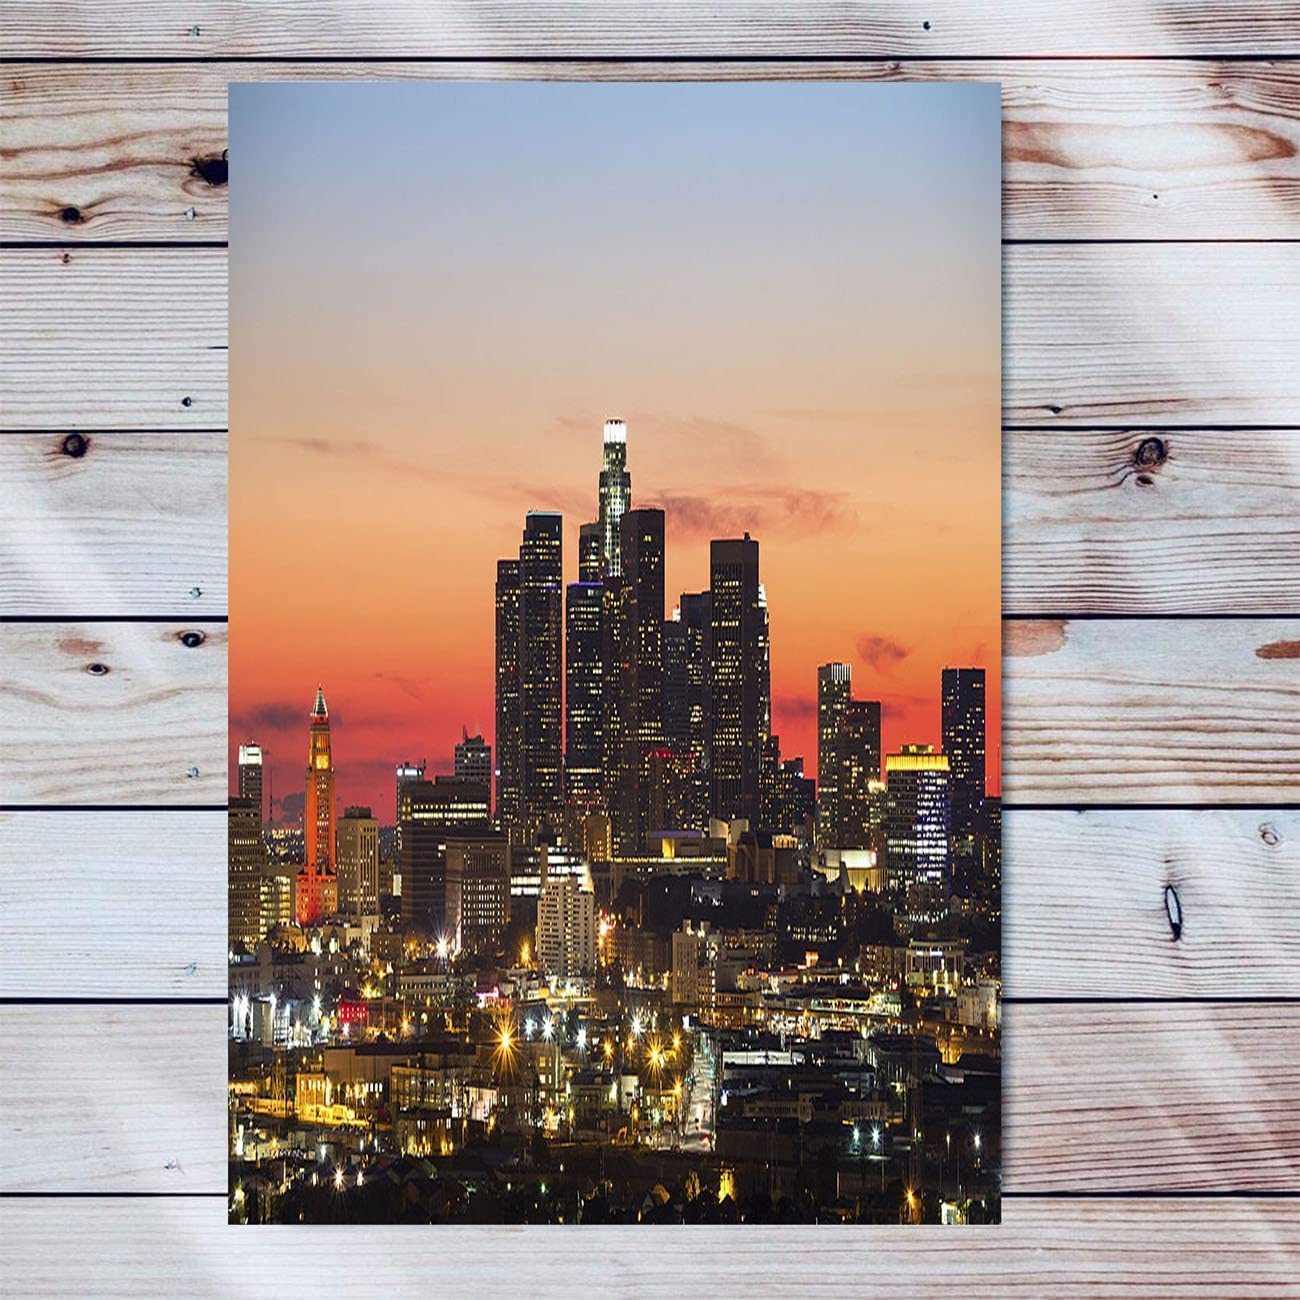 Cityscape Sunset City Night Canvas Wall Art For Living Room Modern Artwork  Downtown Los Angeles At Sunset City Modern Artwork Framed Ready To Hang For Bedroom  Living Room Home Office Decor 12x16